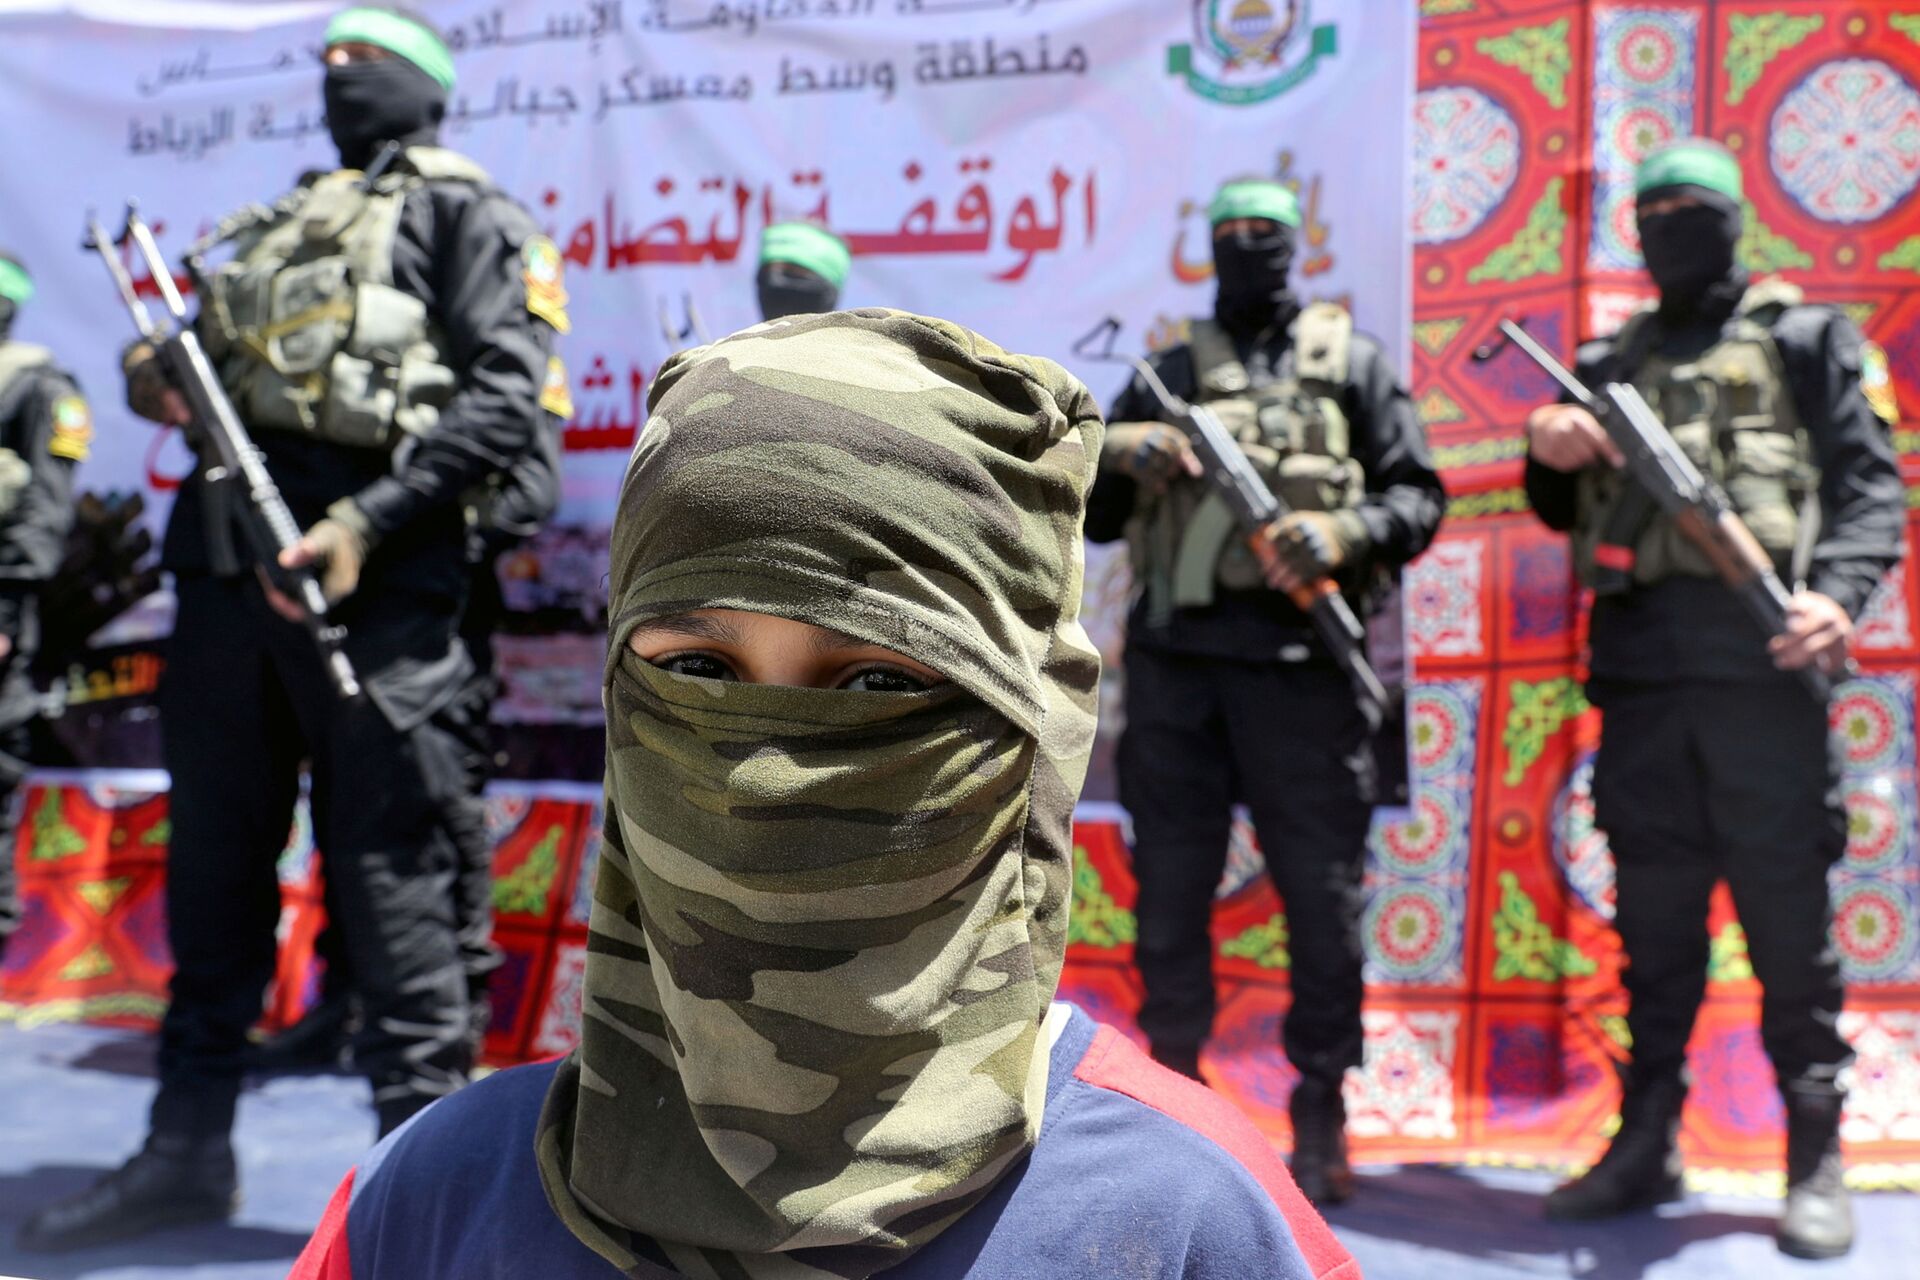 A masked Palestinian boy looks on as Hamas militant take part in a protest over the possible eviction of several Palestinian families from homes on land claimed by Jewish settlers in the Jerusalem's Sheikh Jarrah neighbourhood, in the northern Gaza Strip May 7, 2021 - Sputnik International, 1920, 29.03.2022